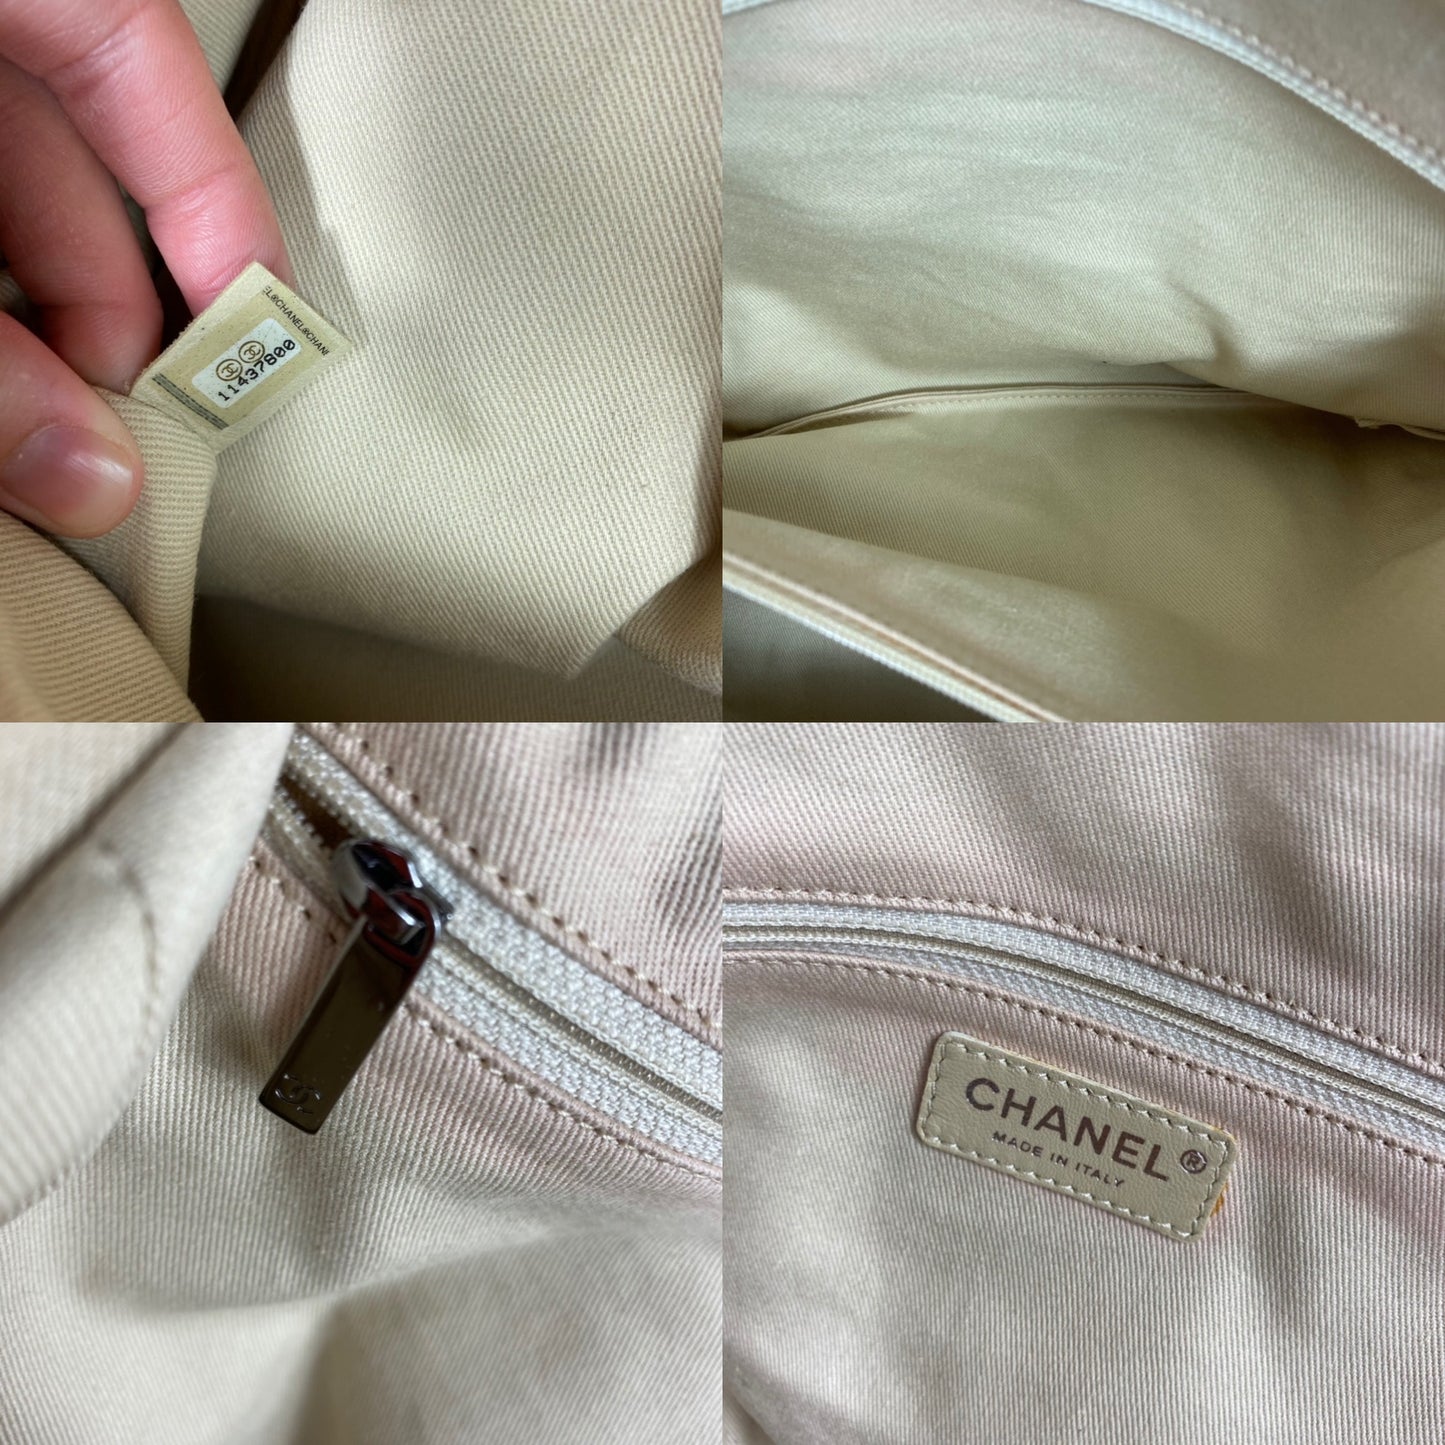 Chanel Large Leather CC Travel Bag